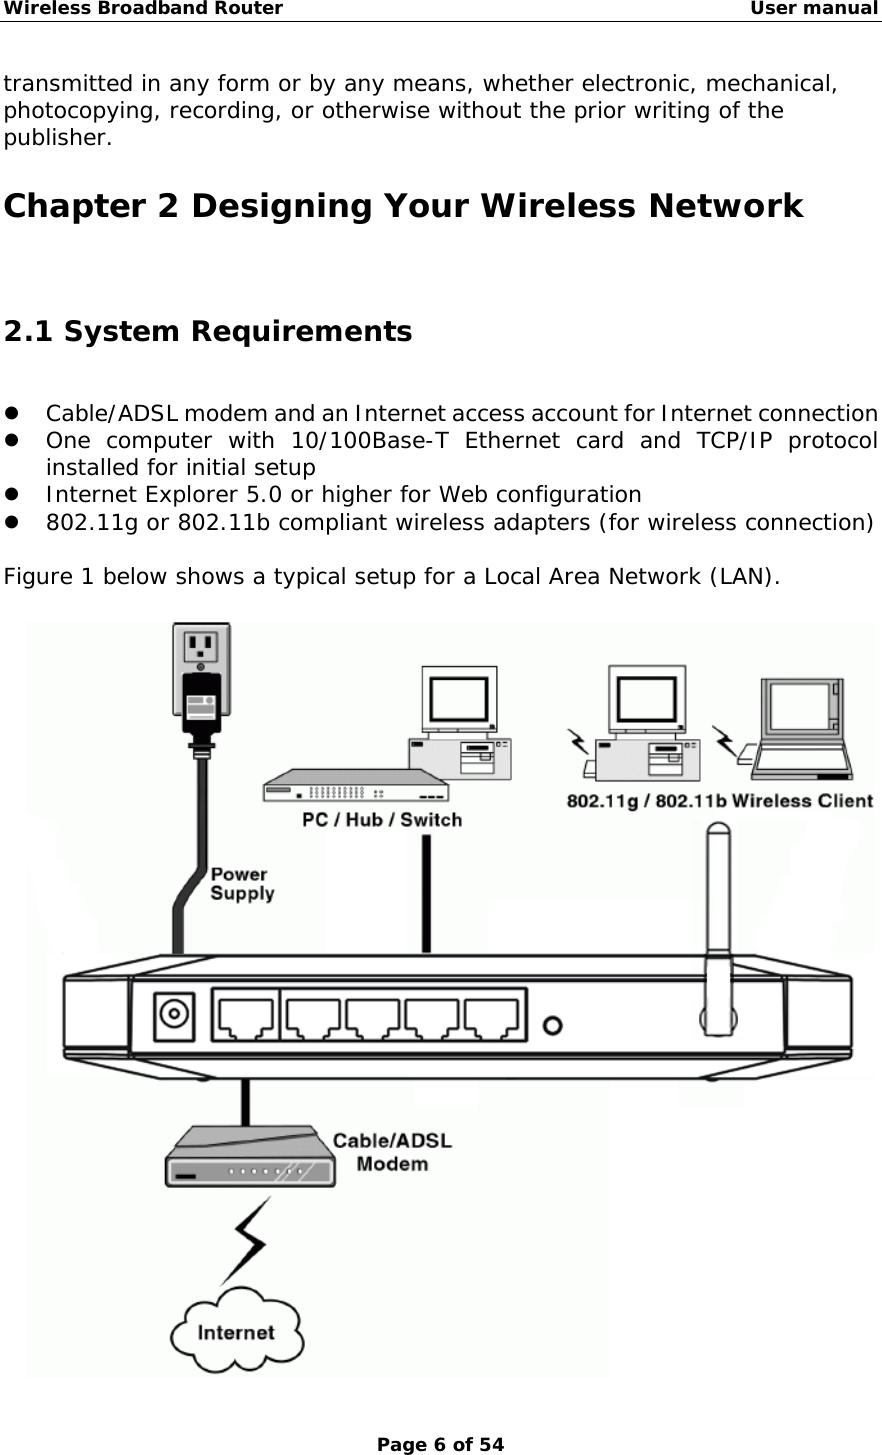 Wireless Broadband Router                                                   User manual Page 6 of 54 transmitted in any form or by any means, whether electronic, mechanical, photocopying, recording, or otherwise without the prior writing of the publisher. Chapter 2 Designing Your Wireless Network 2.1 System Requirements z Cable/ADSL modem and an Internet access account for Internet connection z One computer with 10/100Base-T Ethernet card and TCP/IP protocol installed for initial setup z Internet Explorer 5.0 or higher for Web configuration z 802.11g or 802.11b compliant wireless adapters (for wireless connection)  Figure 1 below shows a typical setup for a Local Area Network (LAN).   